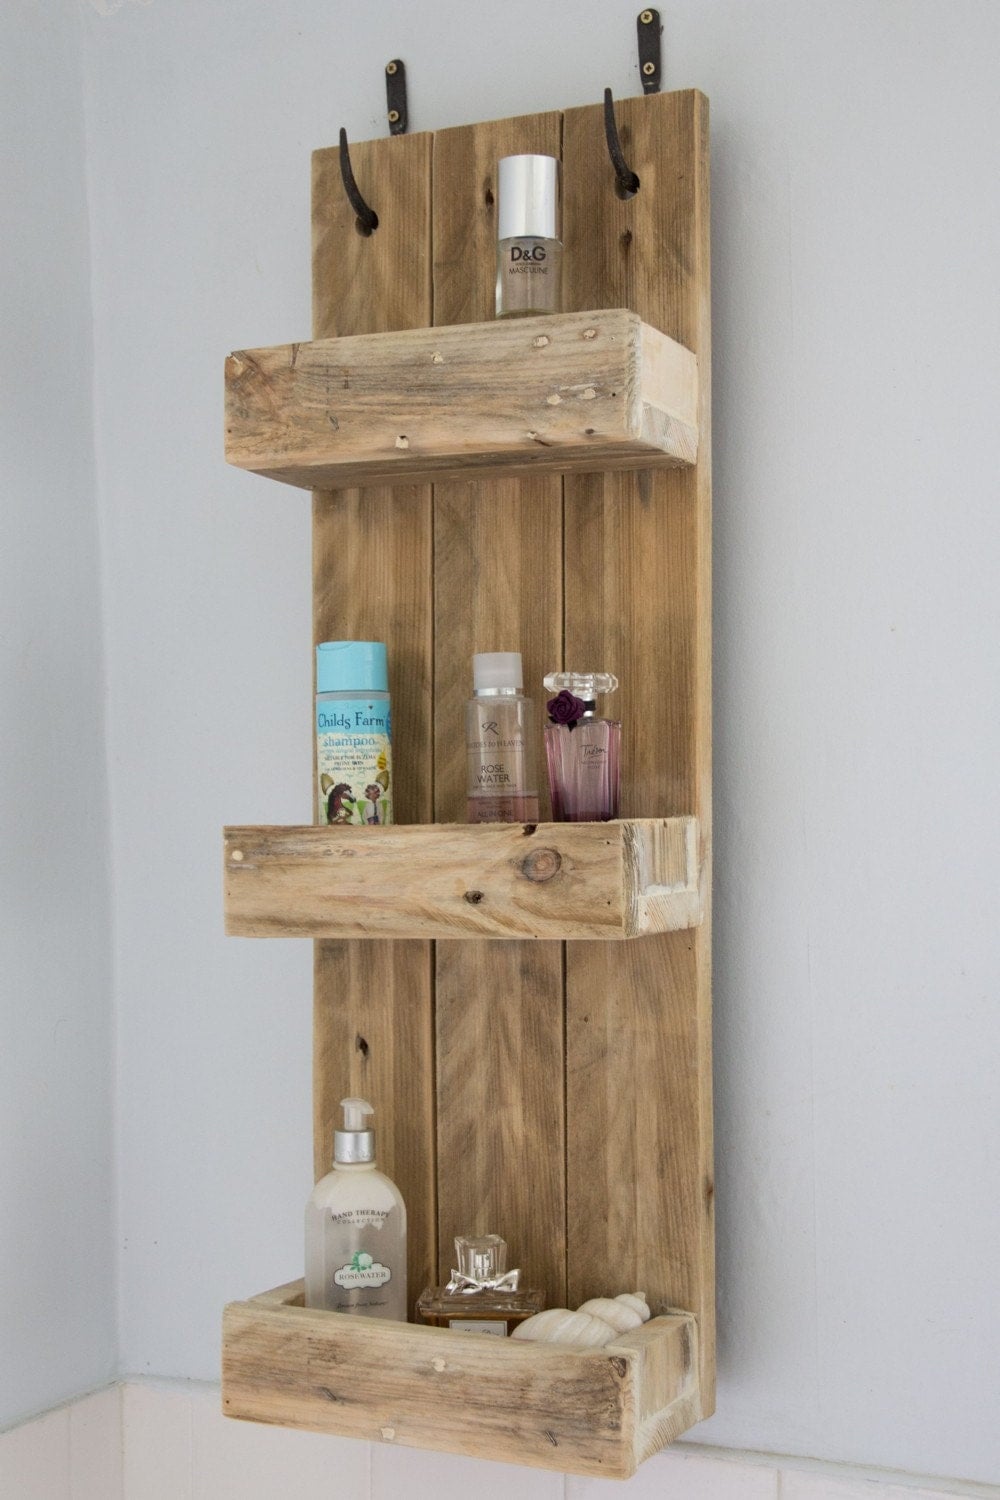 Rustic Bathroom Shelves made from reclaimed pallet wood